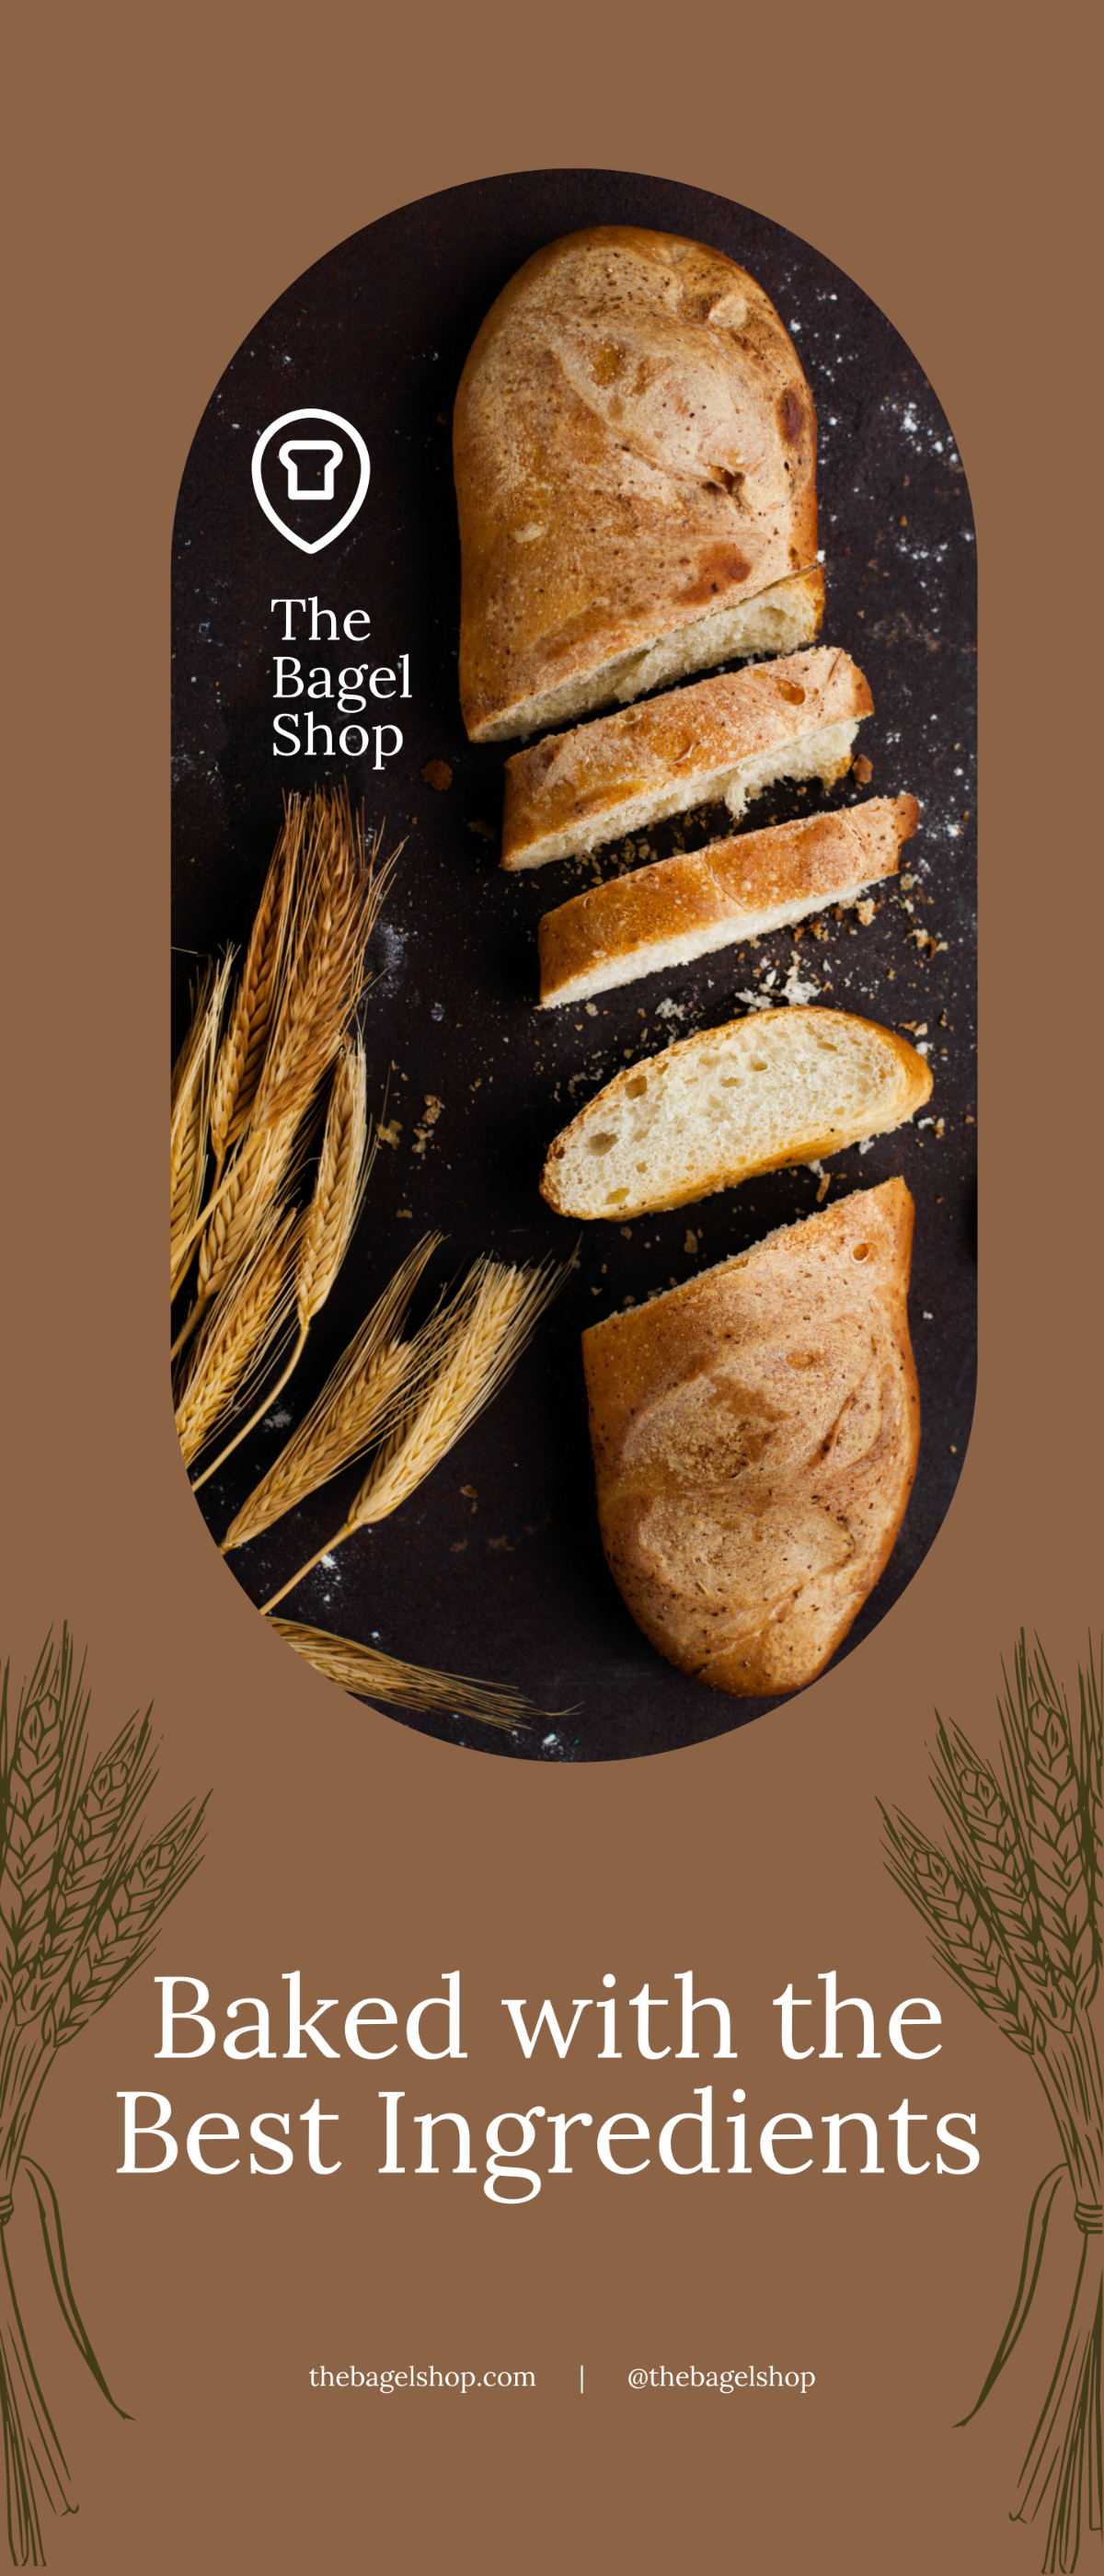 Bakery Promotion Rollup Banner Template